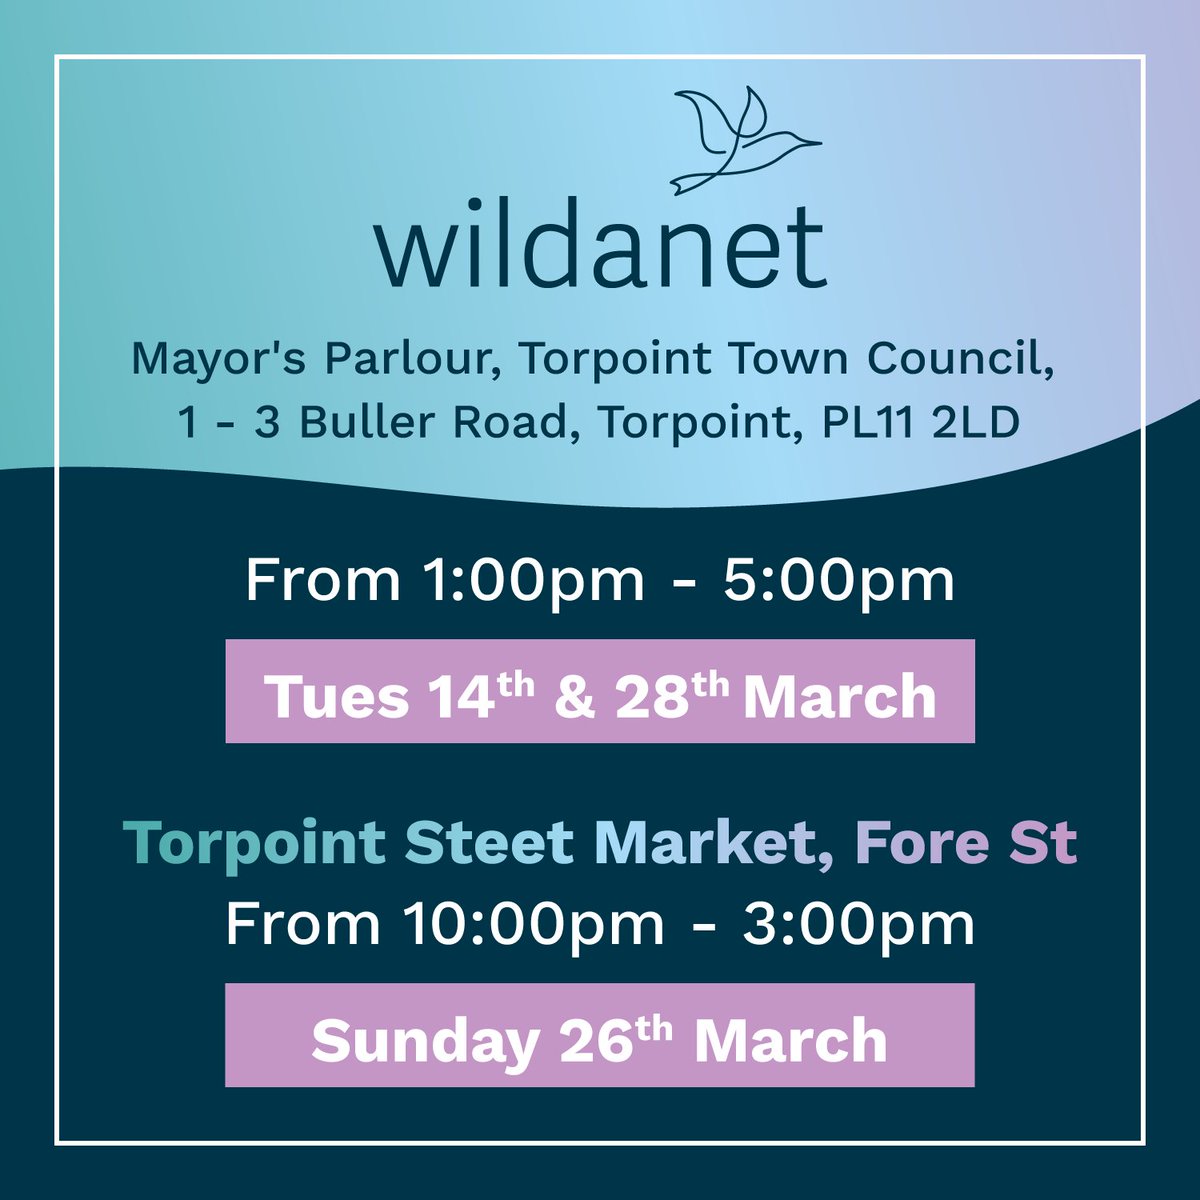 This month the Wildanet team will be back in Torpoint on Tuesday 14th, and Tuesday 28th March for drop-in sessions at the Mayor's Parlour from 1pm - 5pm. You can chat with our expert team about Wildanet's high-speed, full-fibre broadband and how it could benefit you.